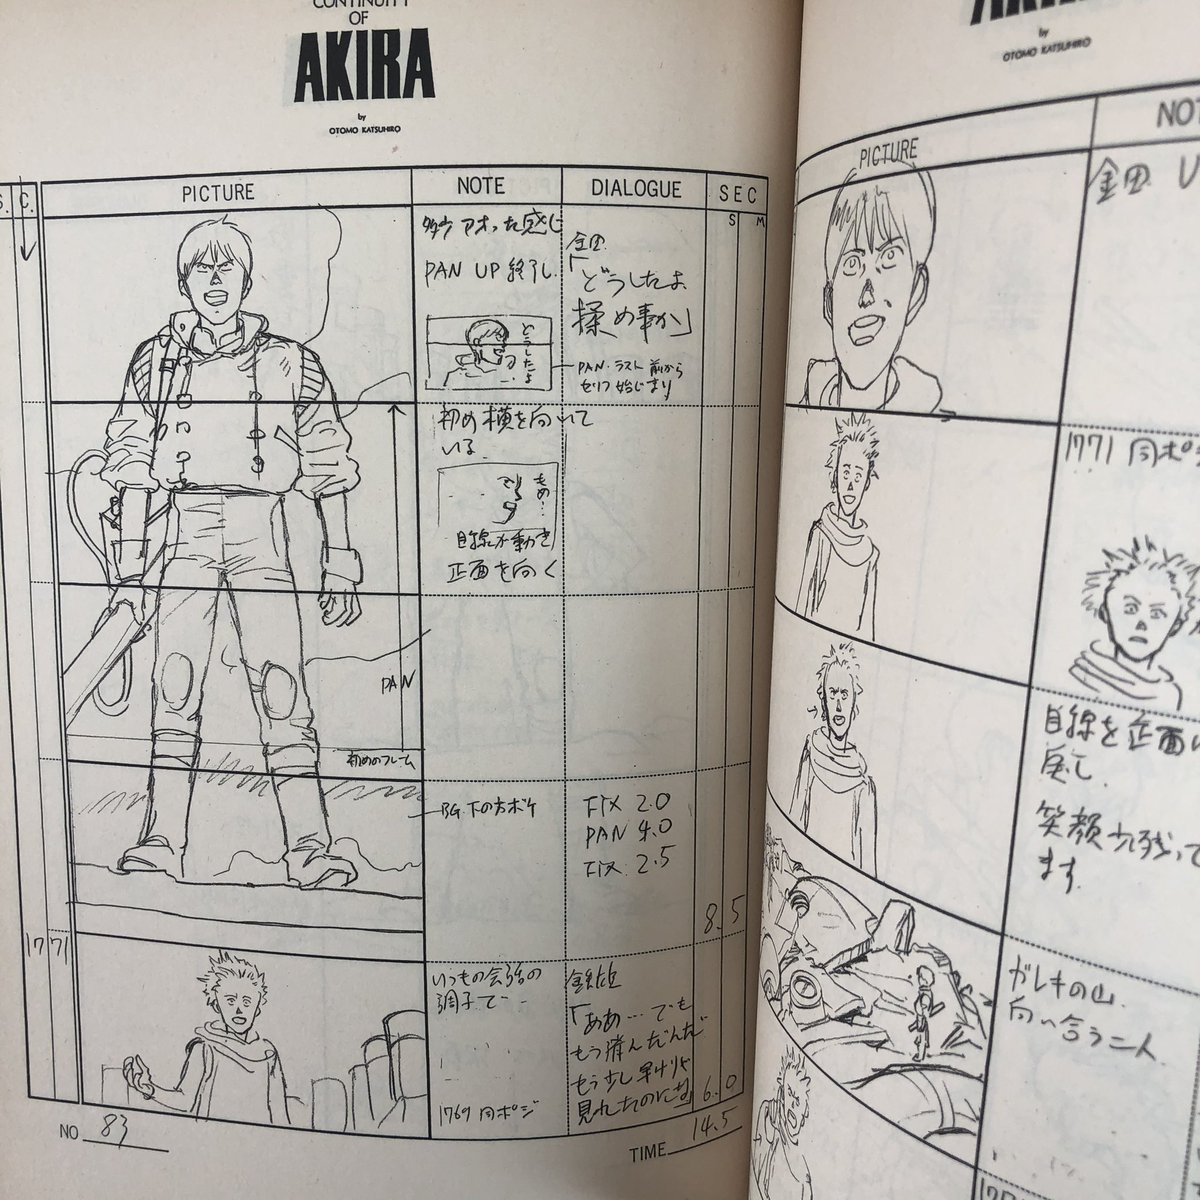 The Continuity of Akira, 1 & 2. Released in 1988, it is probably the largest storyboard version of the movie out there